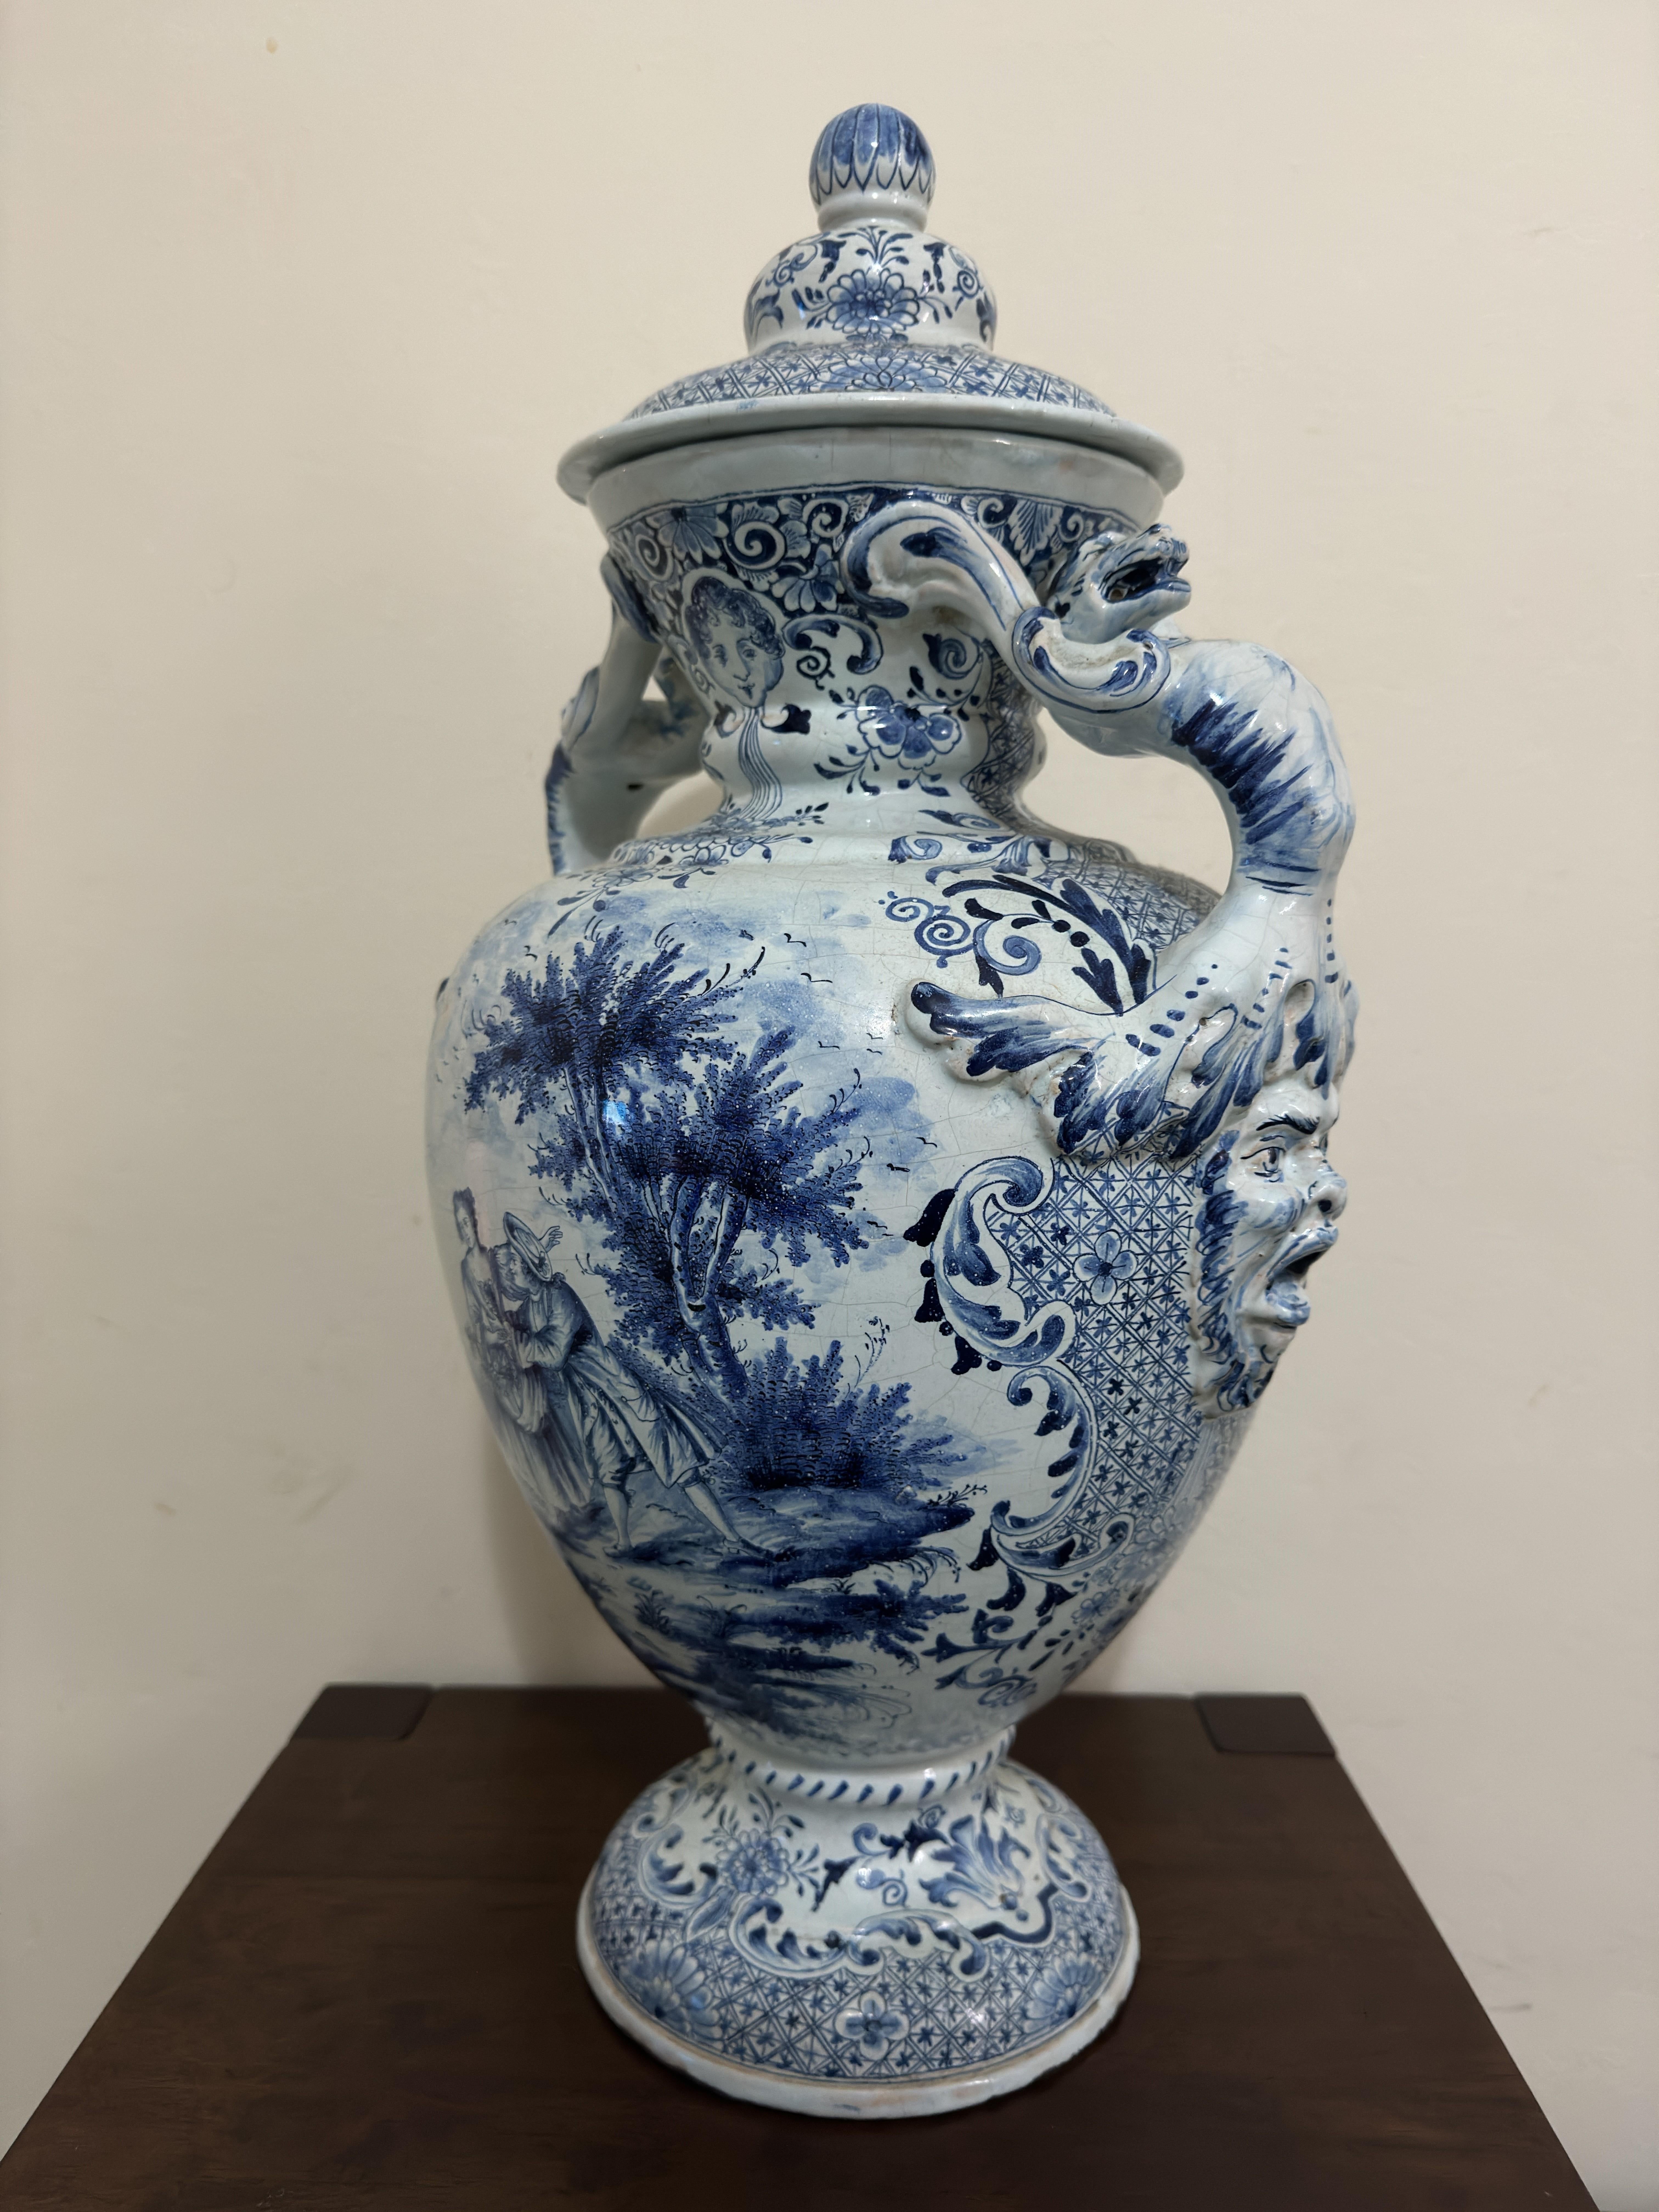 18th Century Large Delft Urn / Vase , with beast decorated handles, 
painted in blue with river landscapes, a courting couple and bridge, within foliate and leaf borders.  A good example of a Dutch Delft piece made in the 18th century with